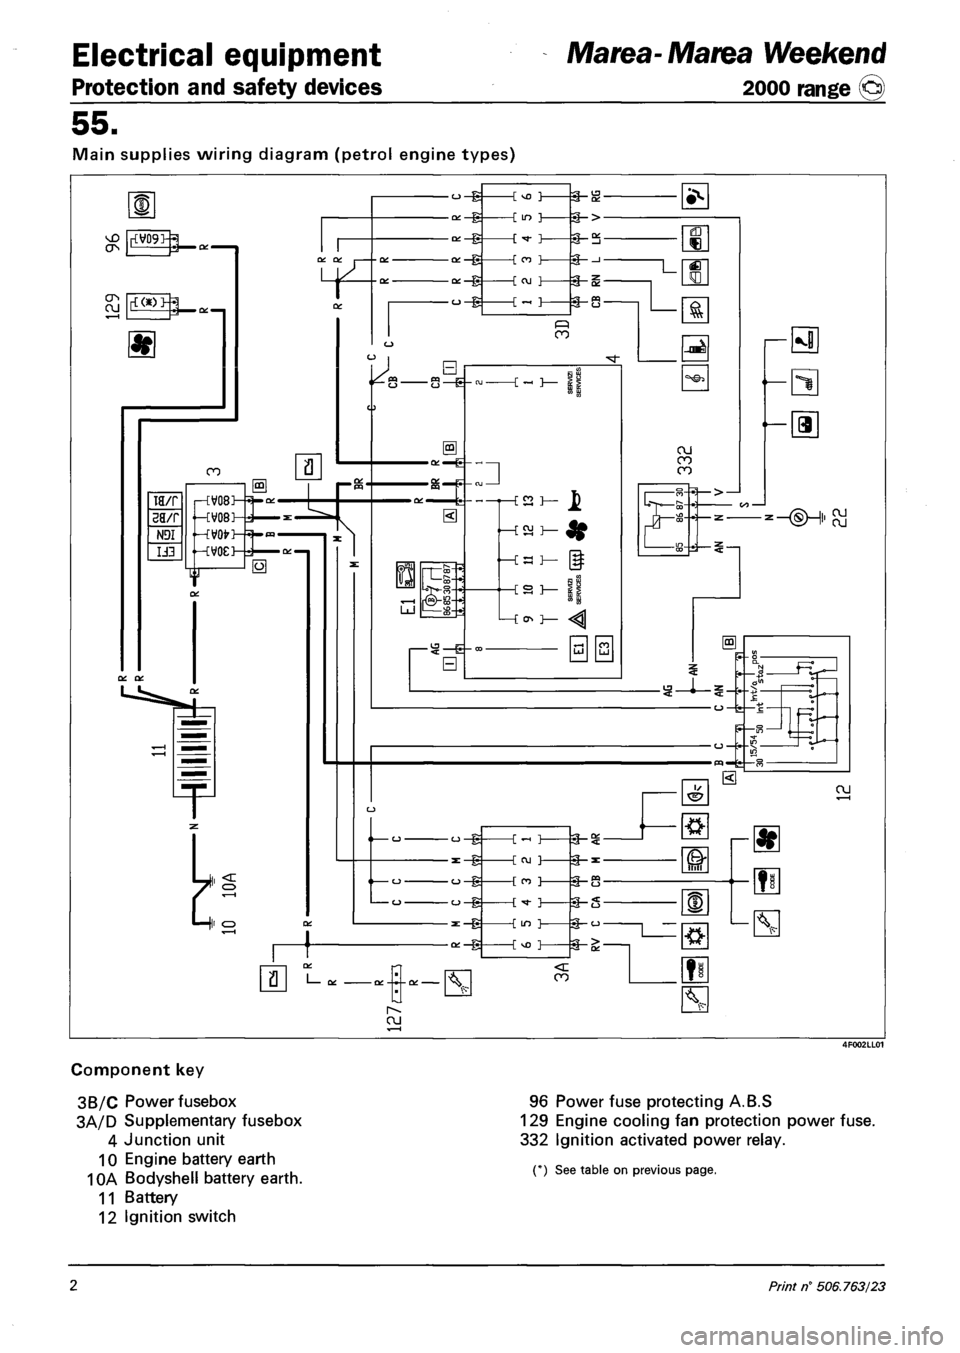 FIAT MAREA 2000 1.G User Guide Electrical equipment 
Protection and safety devices 
Marea- Marea Weekend 
2000 range ©) 
55. 
Main supplies wiring diagram (petrol engine types) 
Component key 
3B/C Power fusebox 
3A/D Supplementar